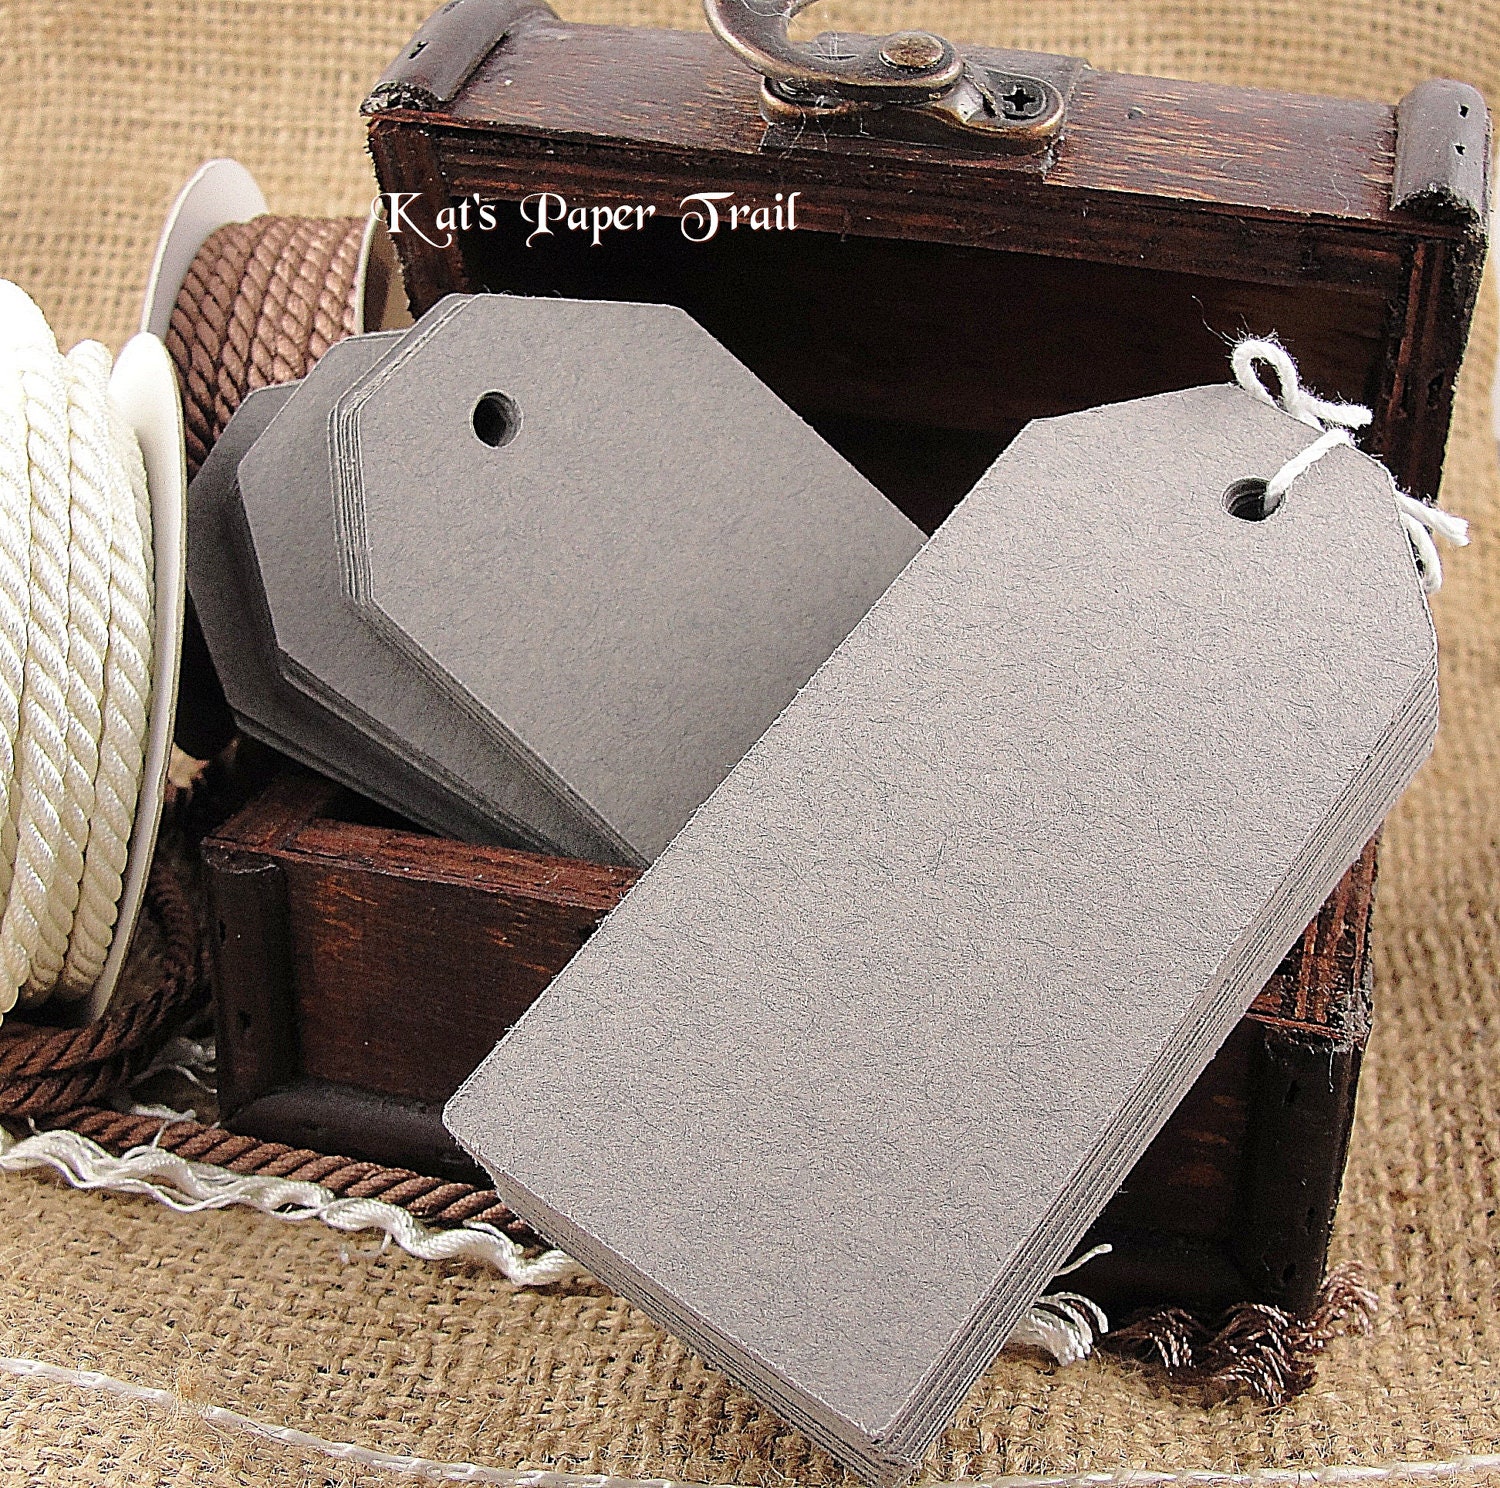 100 Classic Luggage Style Tags, Dark Grey,  Wedding Favor Tags, Escort Cards, Name Cards 3.5" x 1.5"